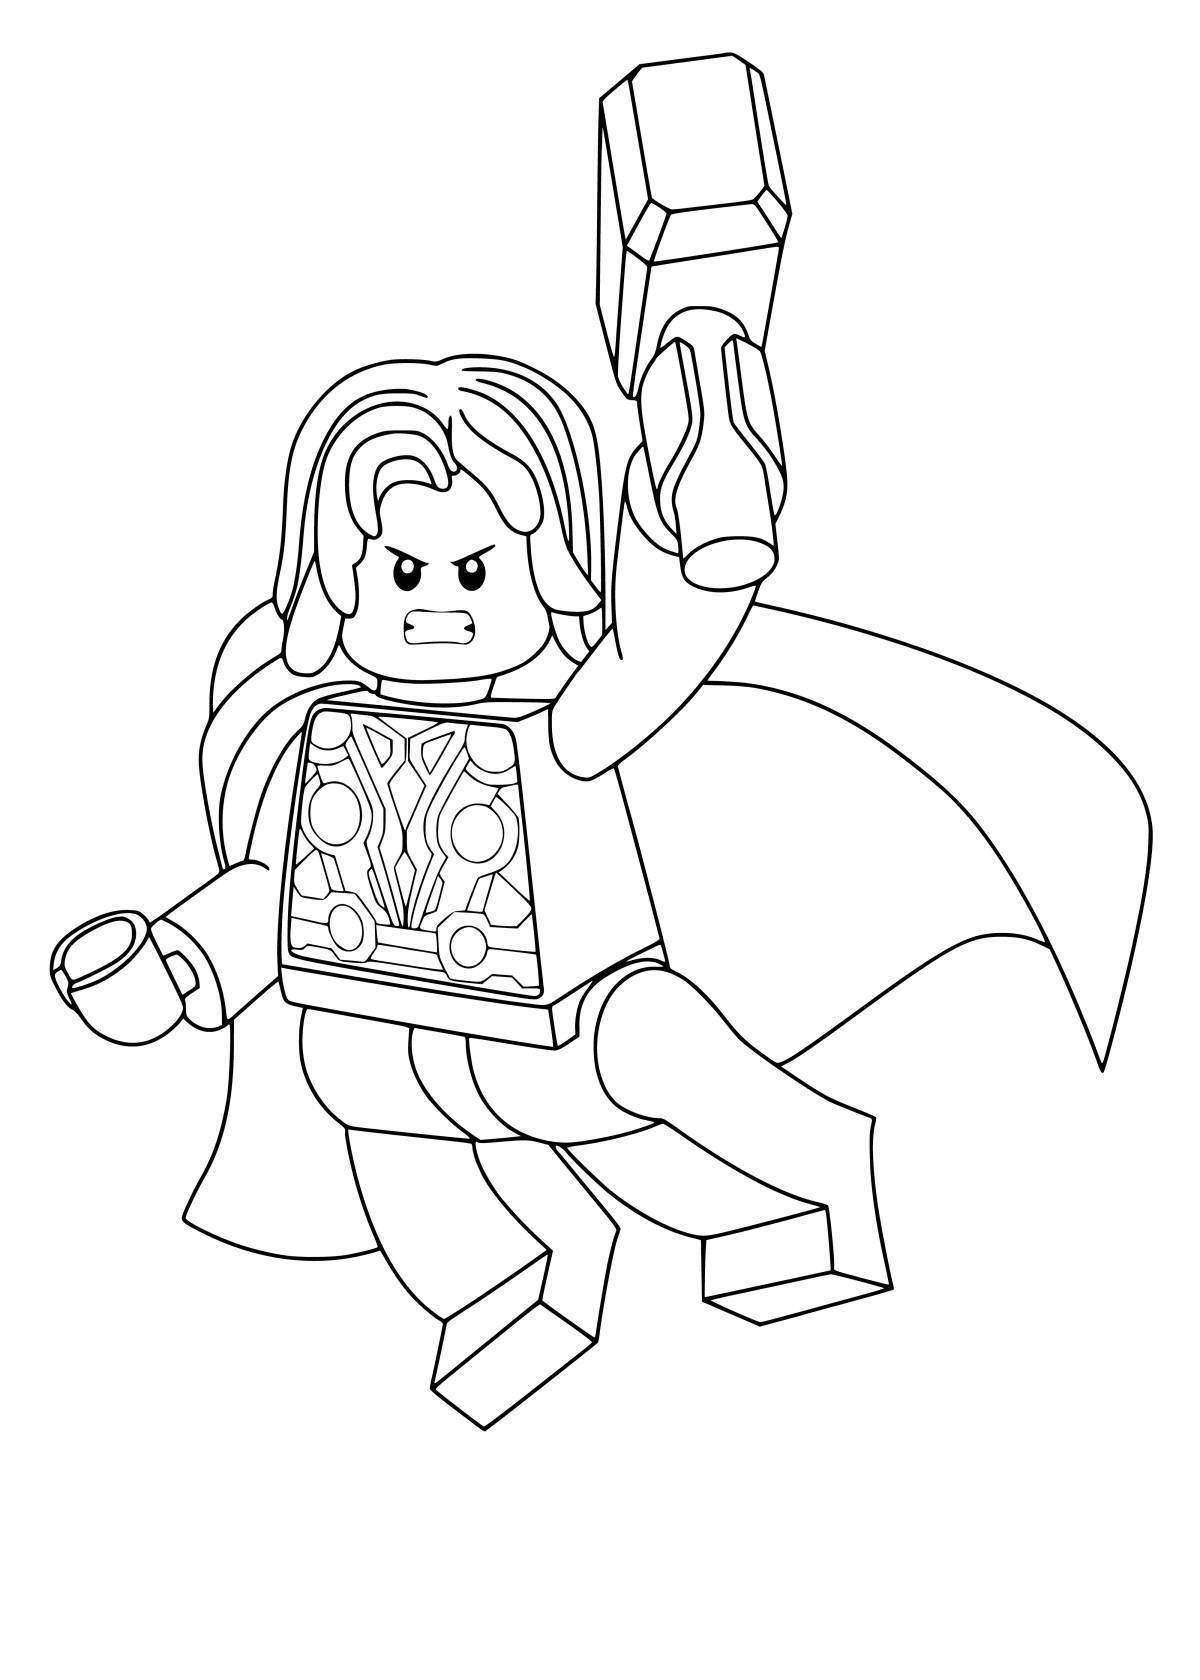 Lego avengers dynamic coloring book